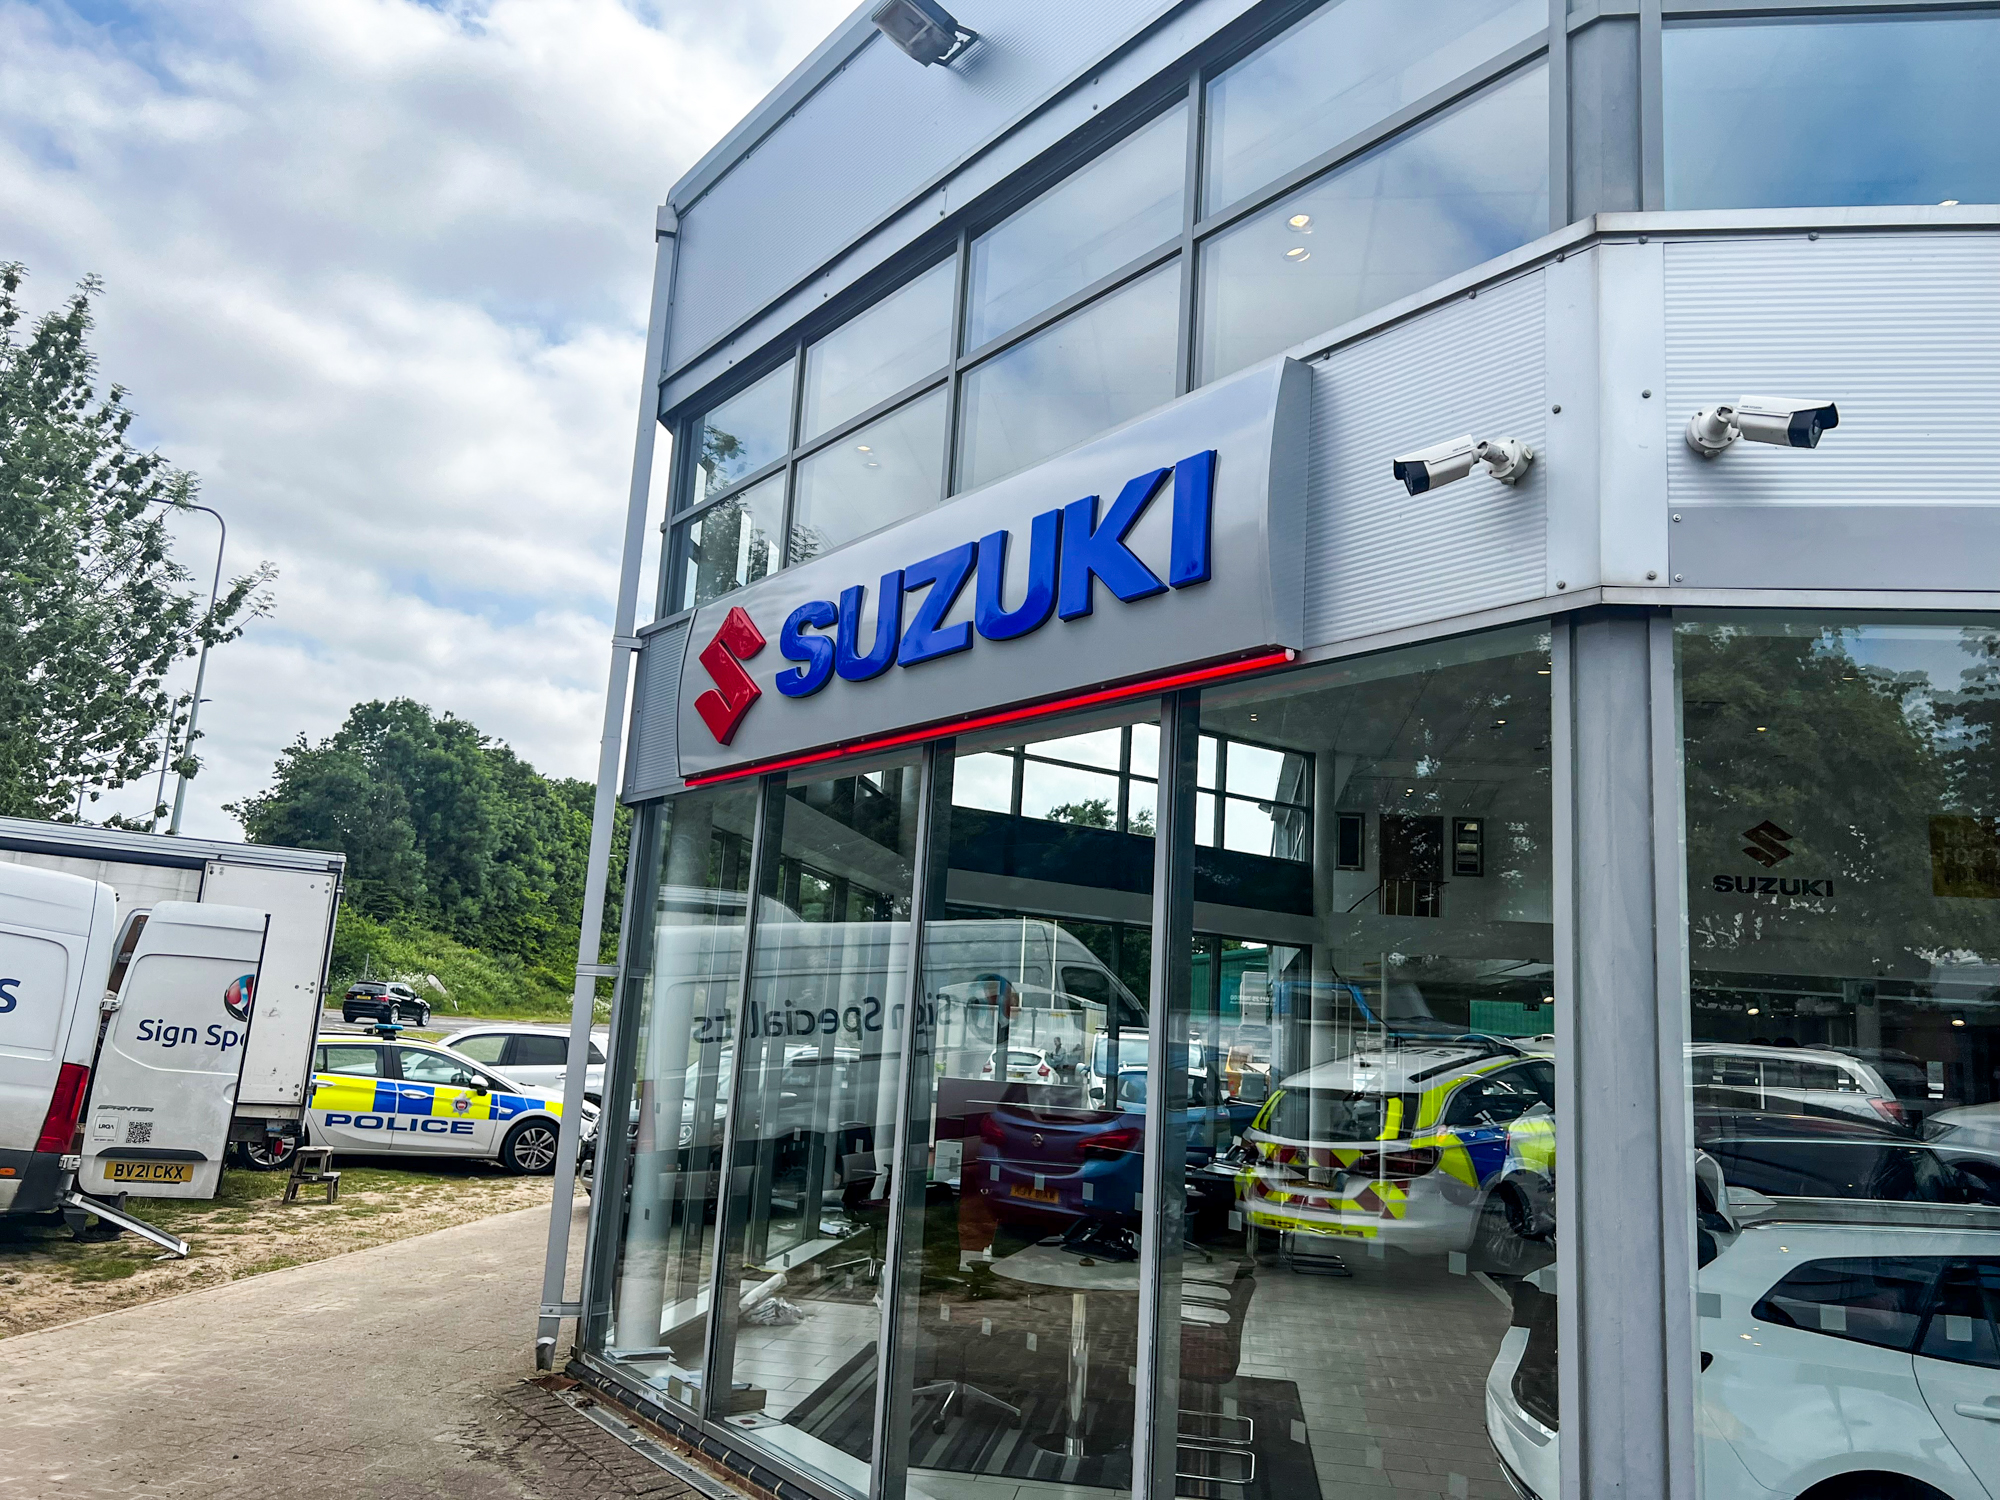 EMC Uckfield one side of the building with Suzuki Sign